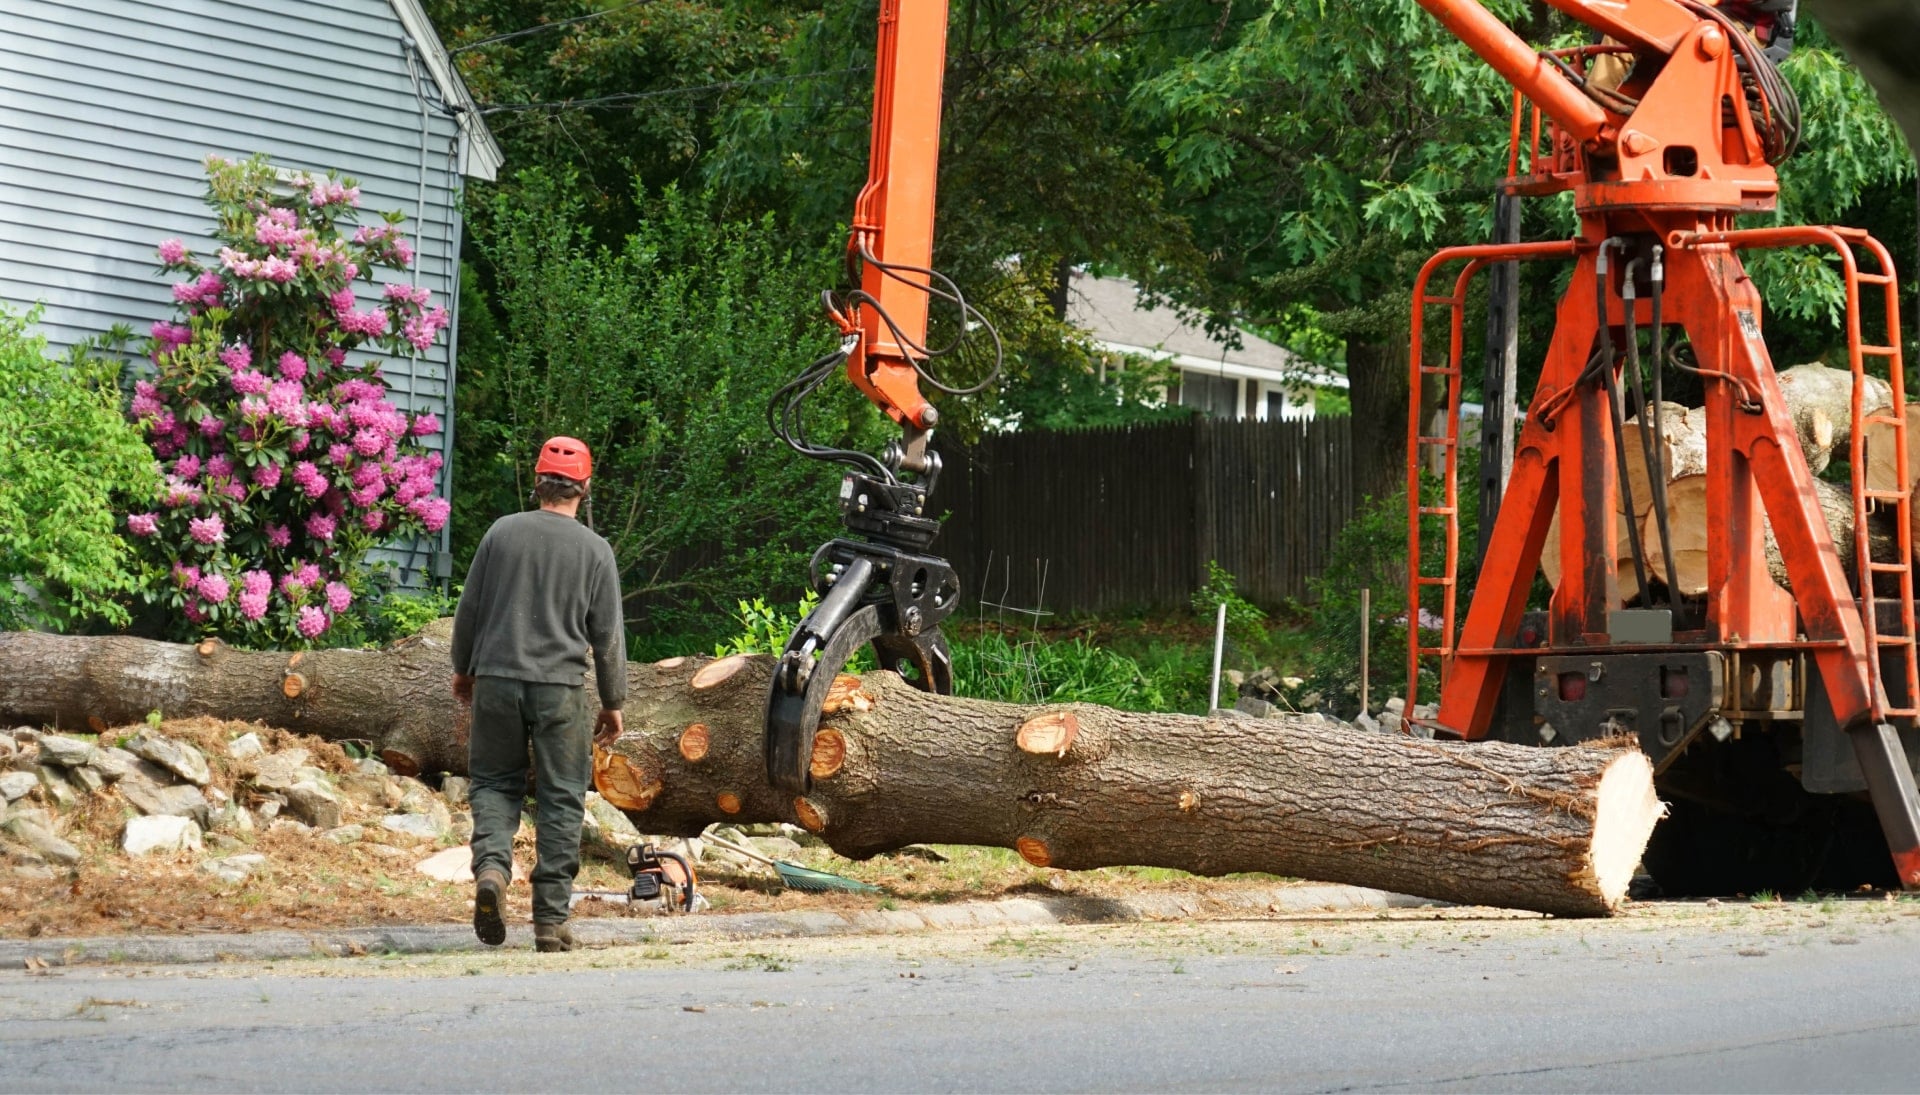 Local partner for Tree removal services in Santa Rosa